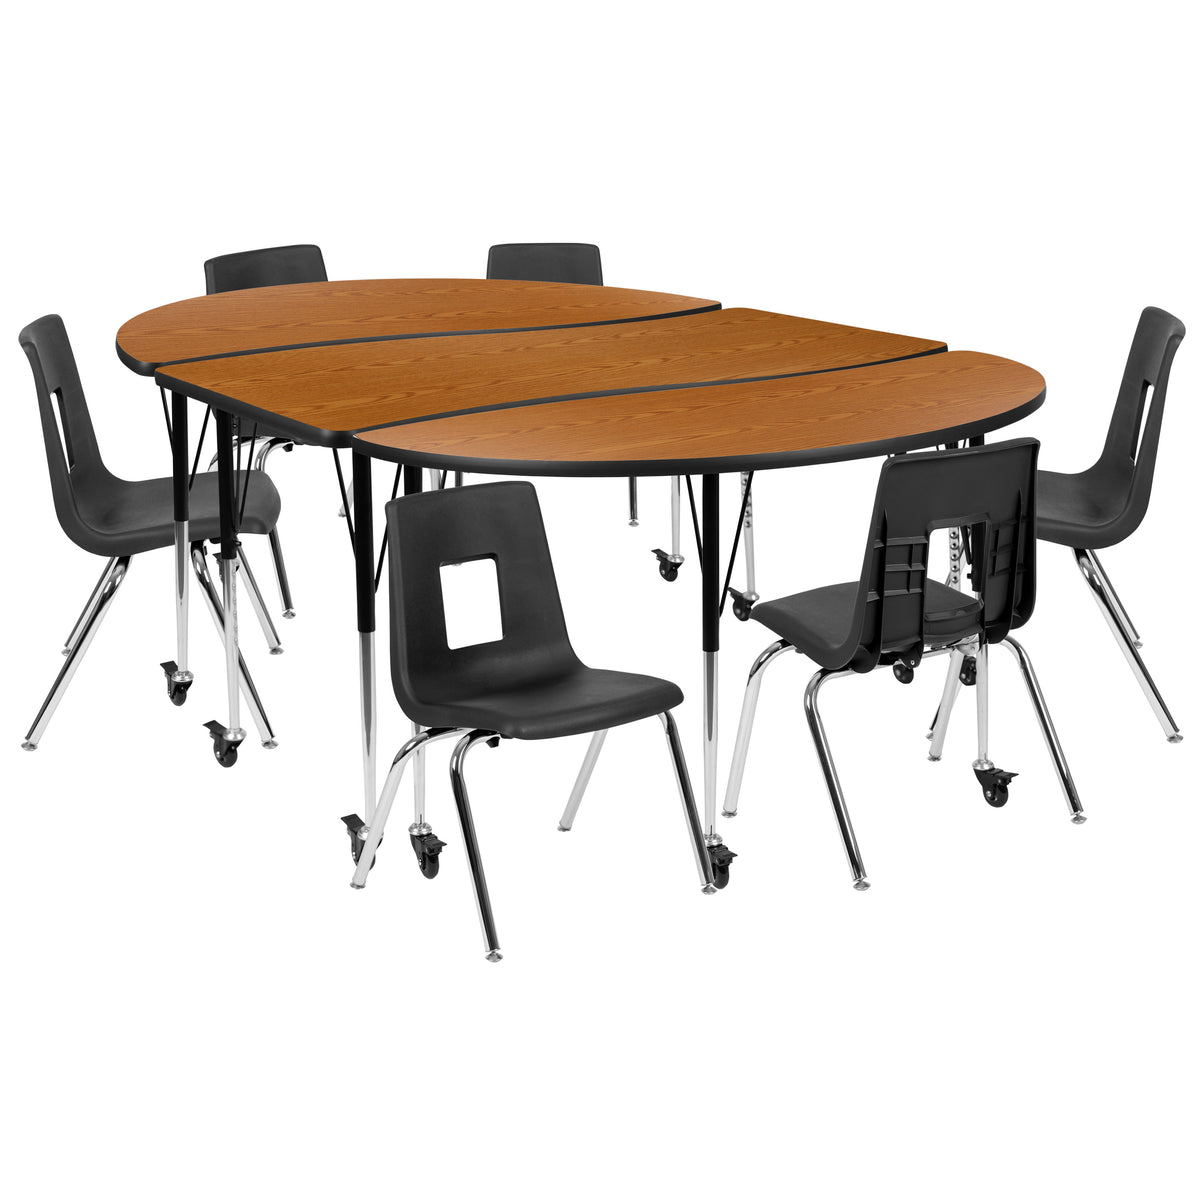 Oak |#| Mobile 86inch Oval Wave Activity Table Set-16inch Student Stack Chairs, Oak/Black